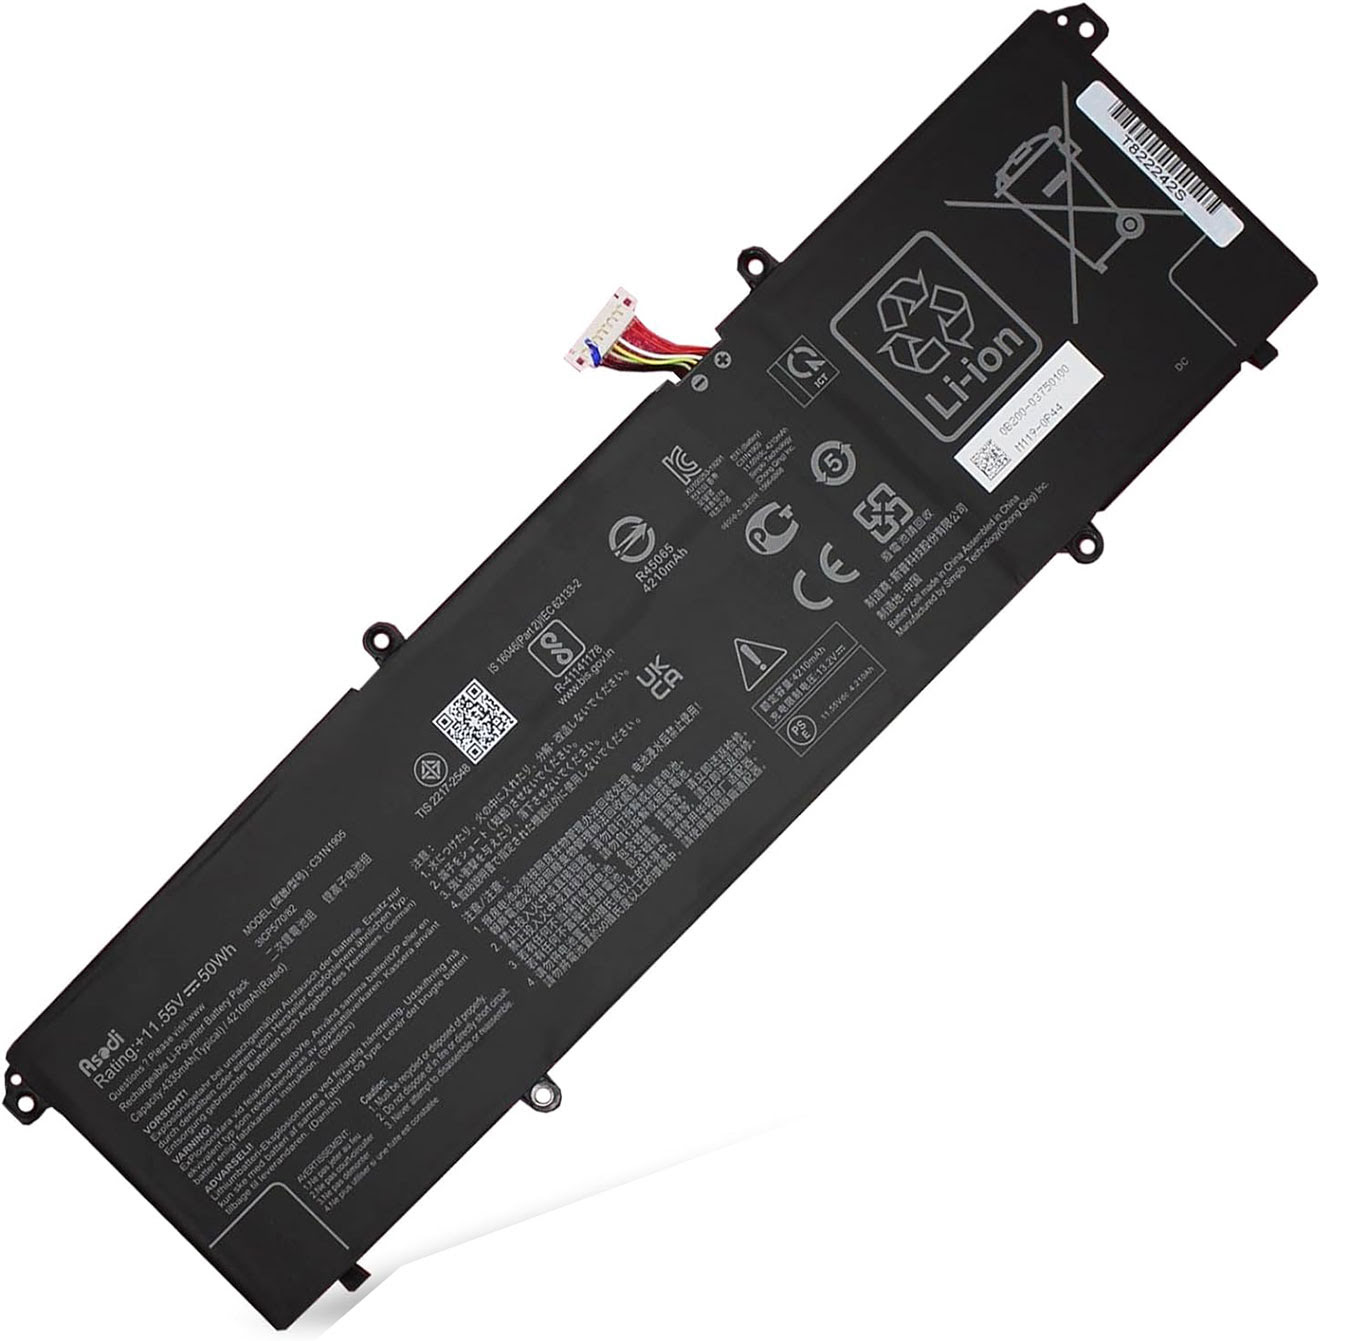 Asus 0b200-03750100, 3icp5/70/82 Laptop Battery For Adolbook13 2020, Dolbook14 2020 replacement